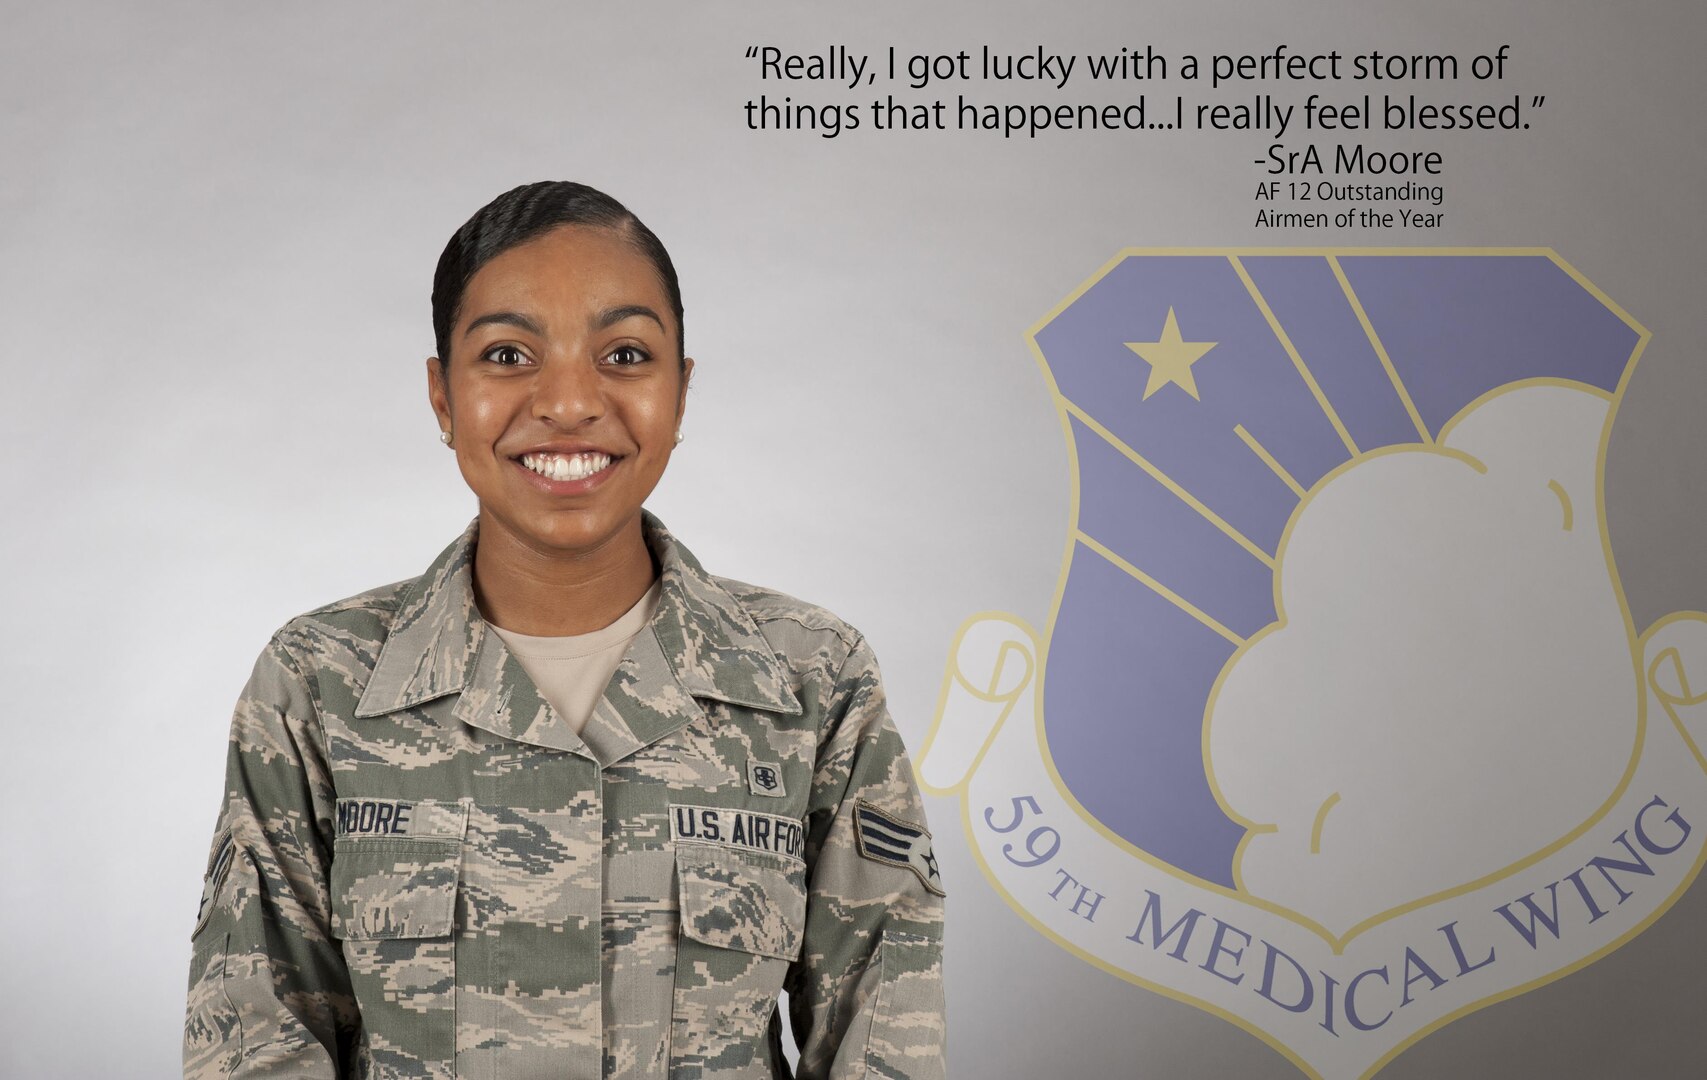 Senior Airman Nicole Moore, 59th Medical Wing medical technician, was recognized as one of the Air Force 12 Outstanding Airmen of the Year for 2017, July 7th, 2017.  An Air Force selection board at the Air Force Personnel Center considered 36 nominees who represented major commands, direct reporting units, field operating agencies and Headquarters Air Force. The board selected the final 12 Airmen based on superior leadership, job performance and personal achievements. (U.S. Air Force image by Senior Airman Stefan Alvarez)